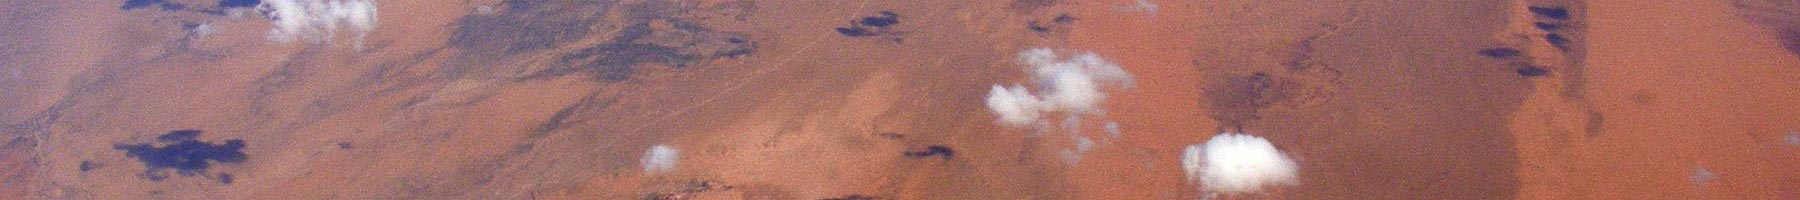 Photograph of a view flying above clouds looking down on the Sahara desert.